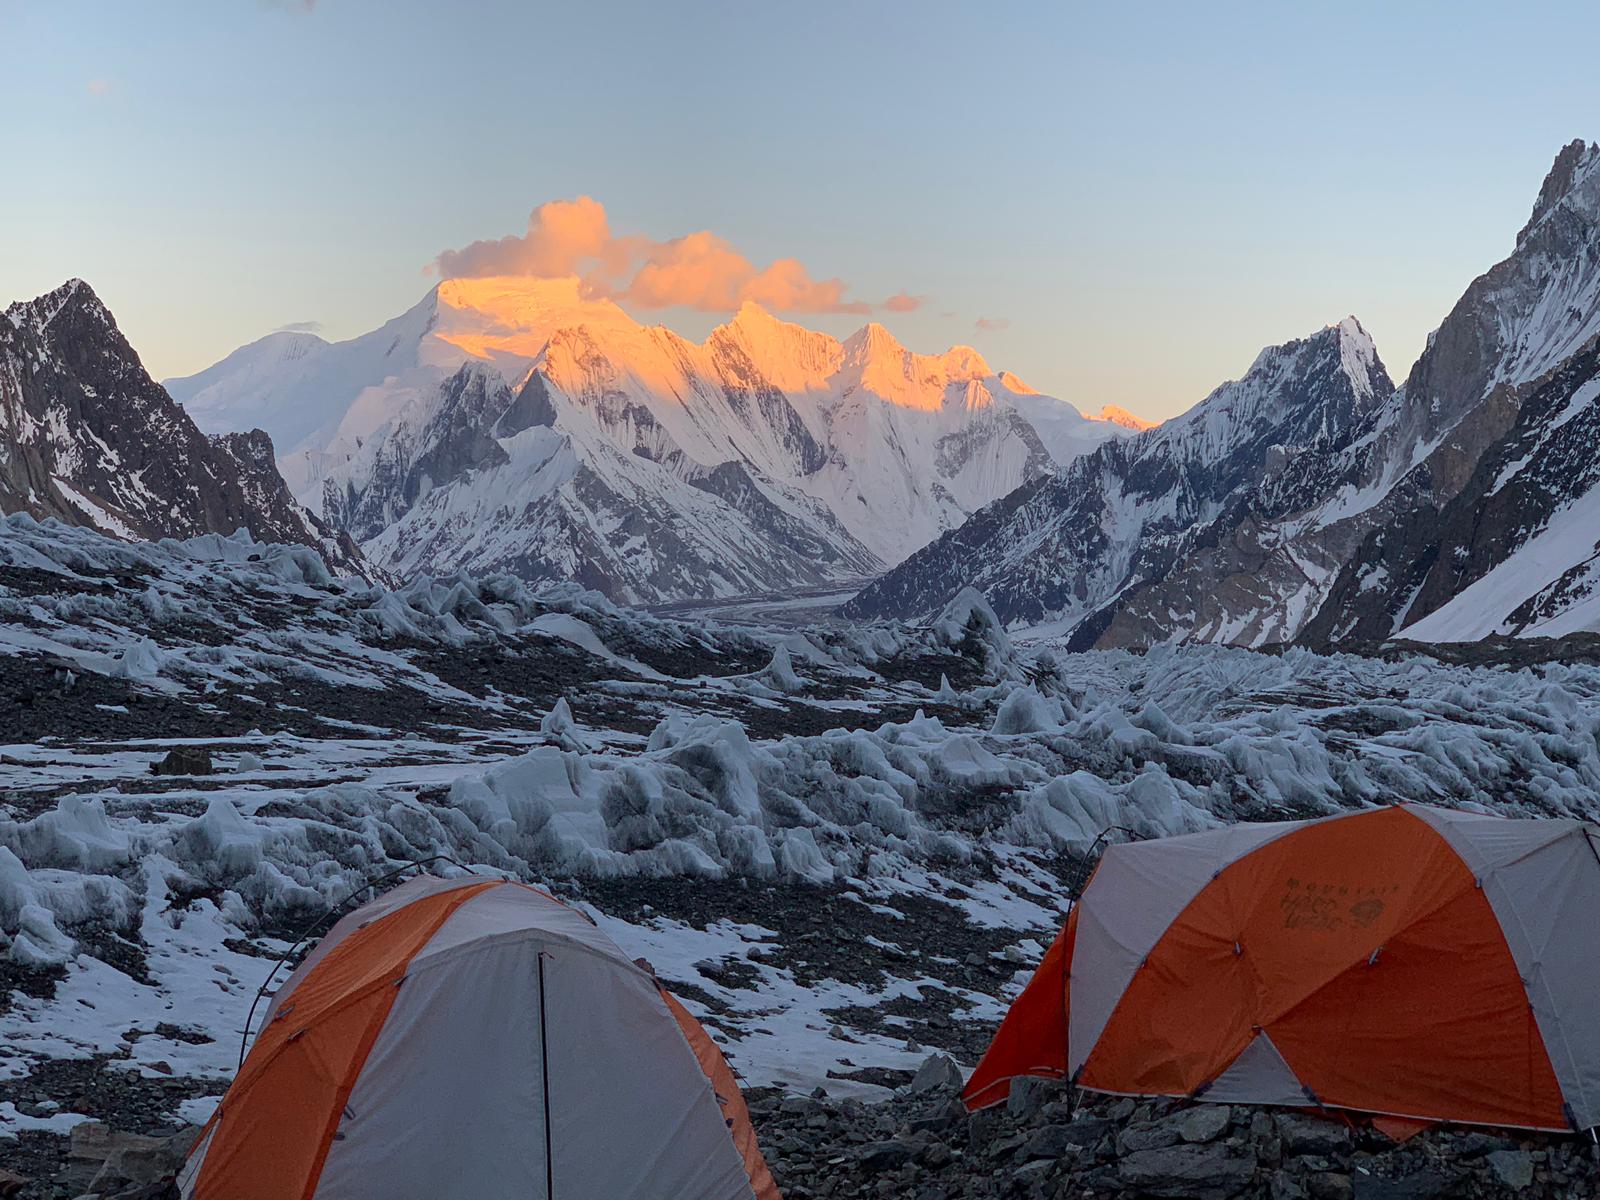 The evening view of Chogolisa from K2 base camp